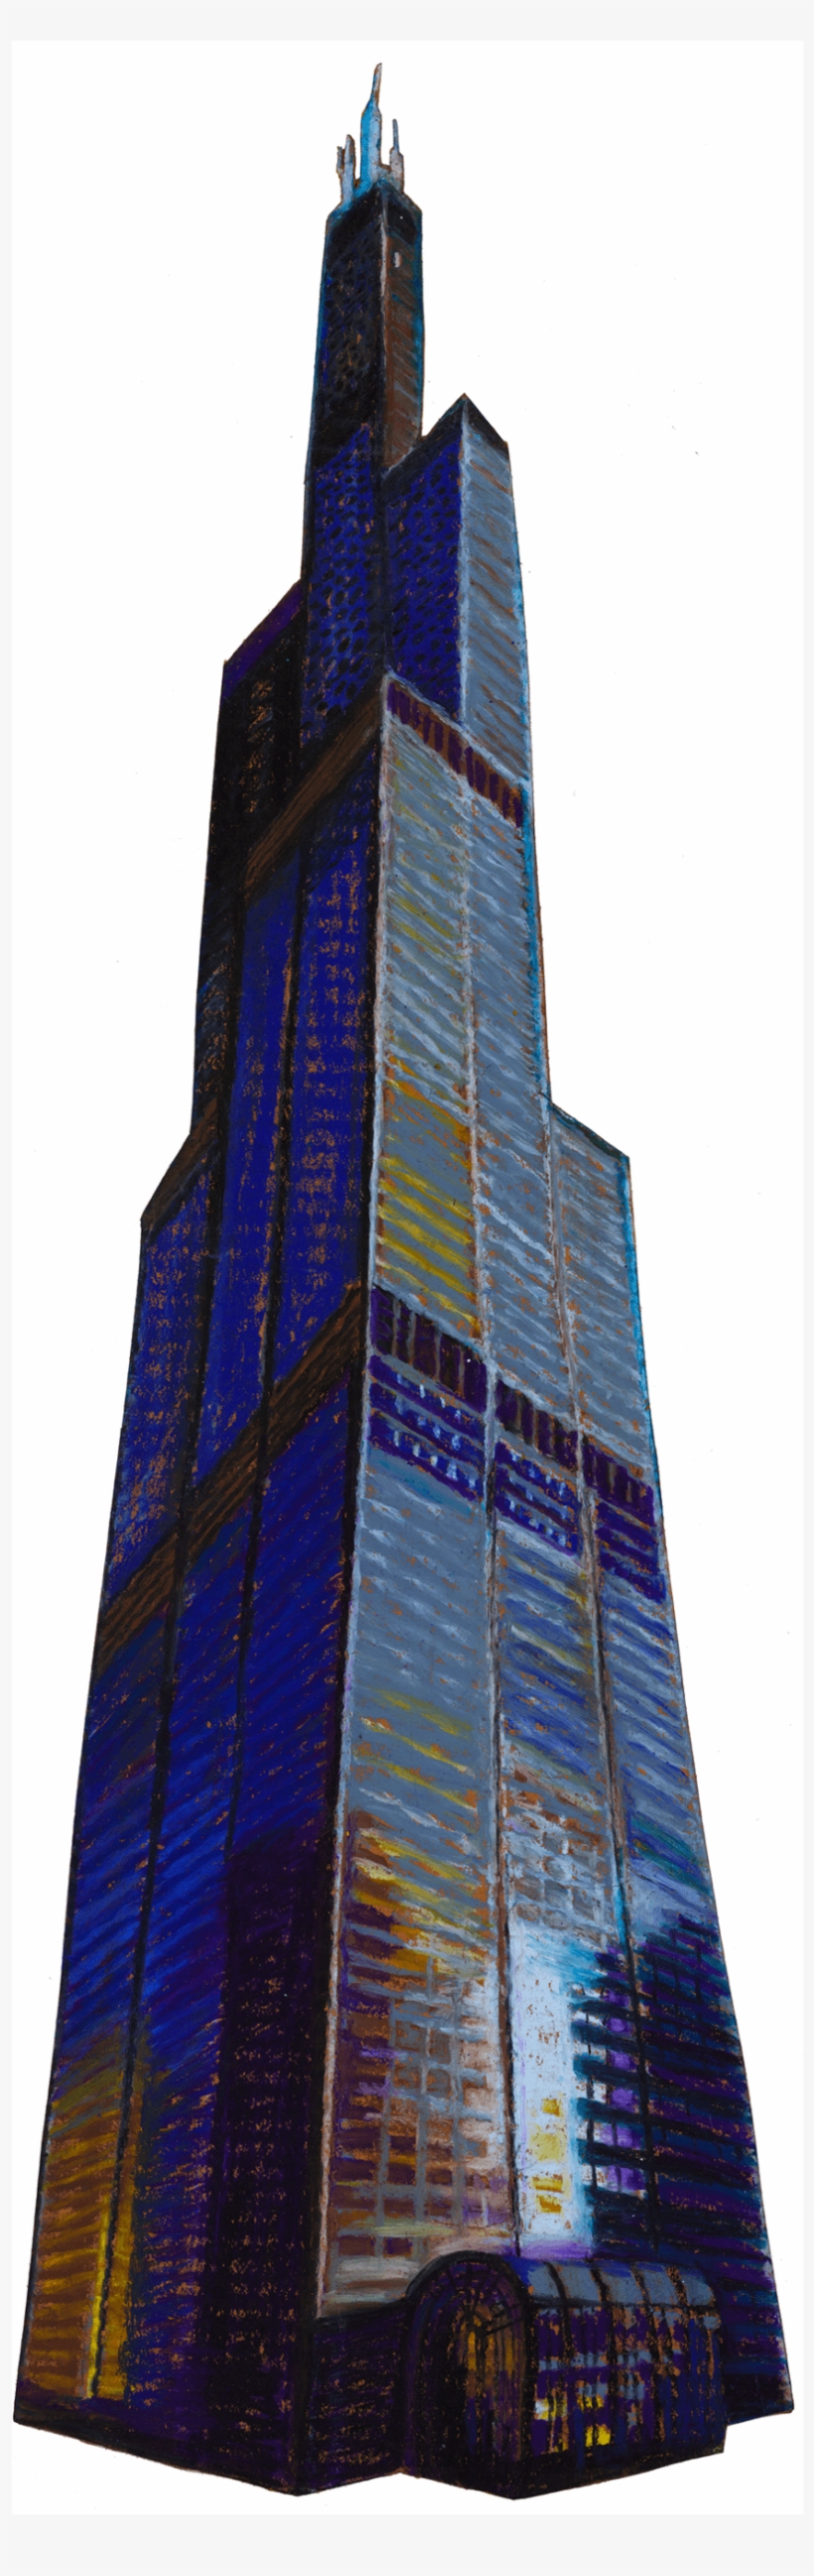 Chicago Sears Tower - Willis Tower, transparent png #3336233